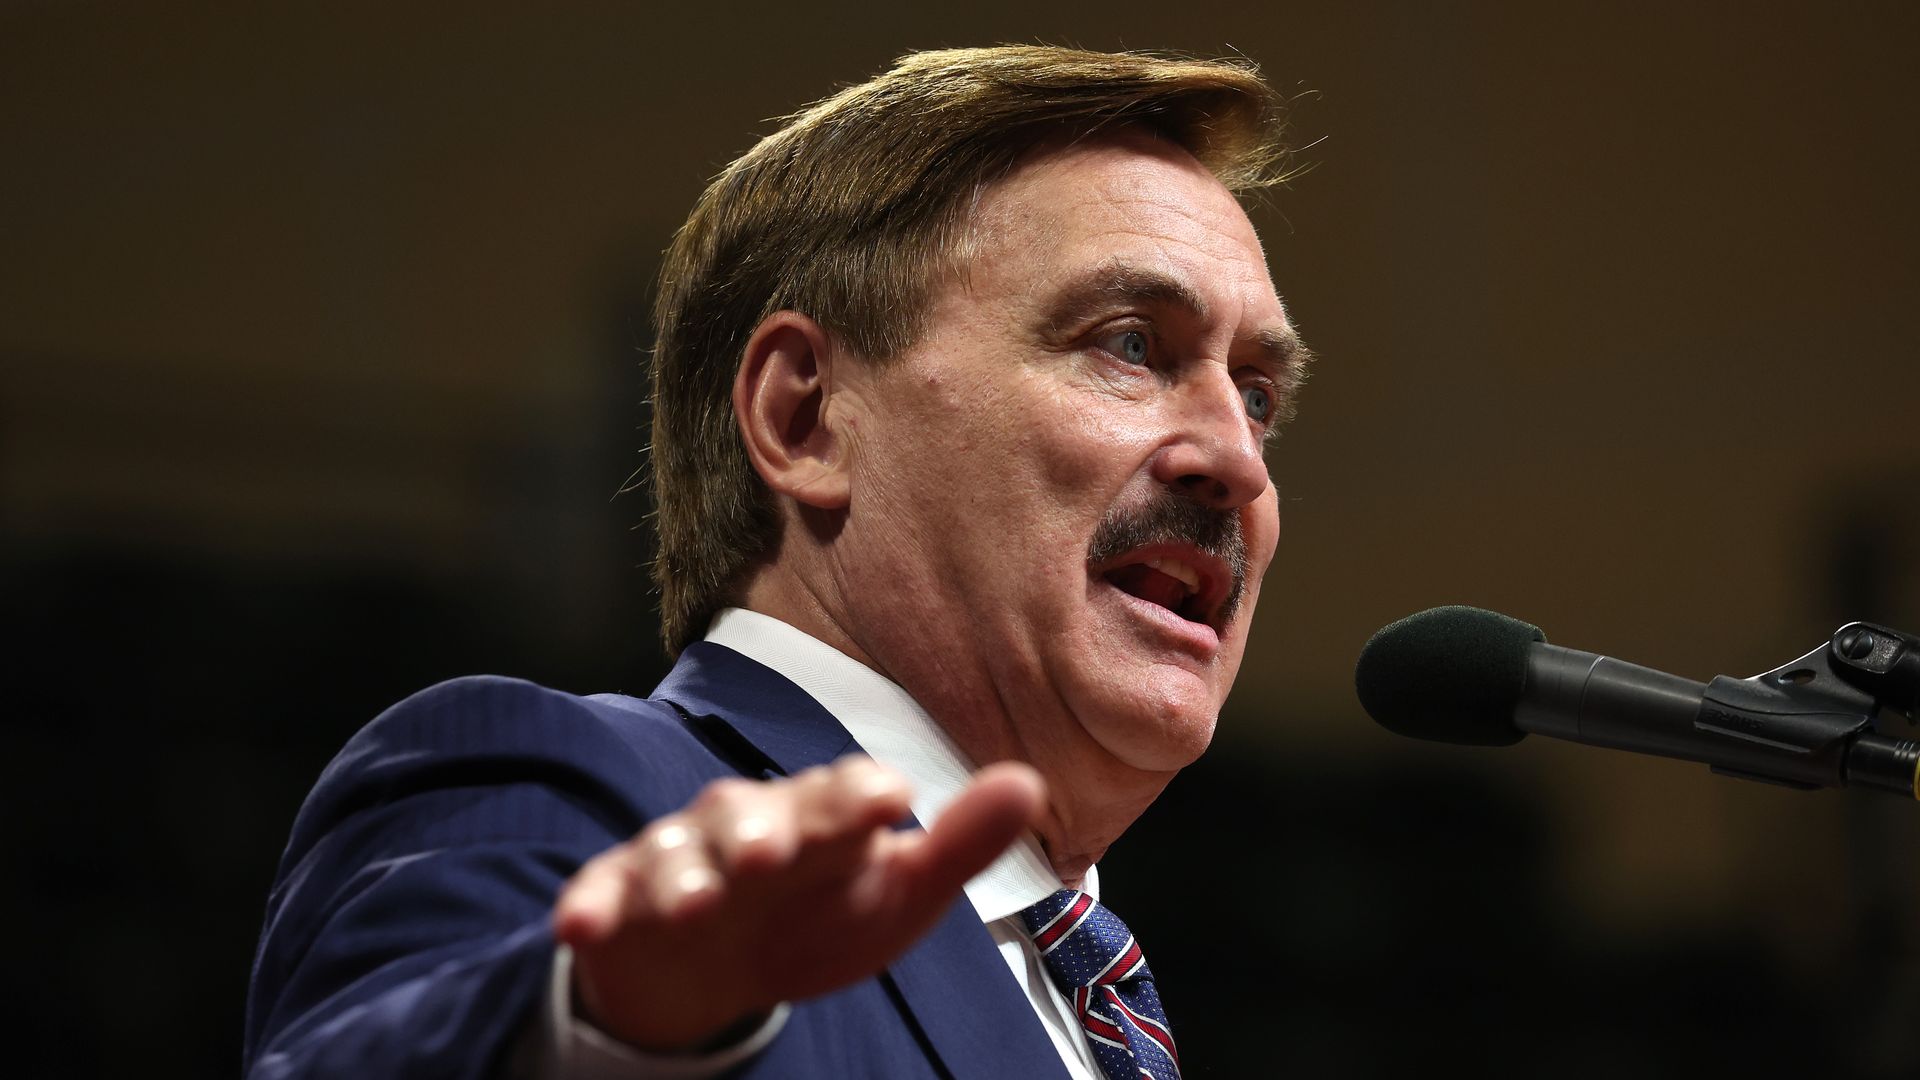 MyPillow CEO Mike Lindell speaks during a "Save America" rally at Alaska Airlines Center on July 09.